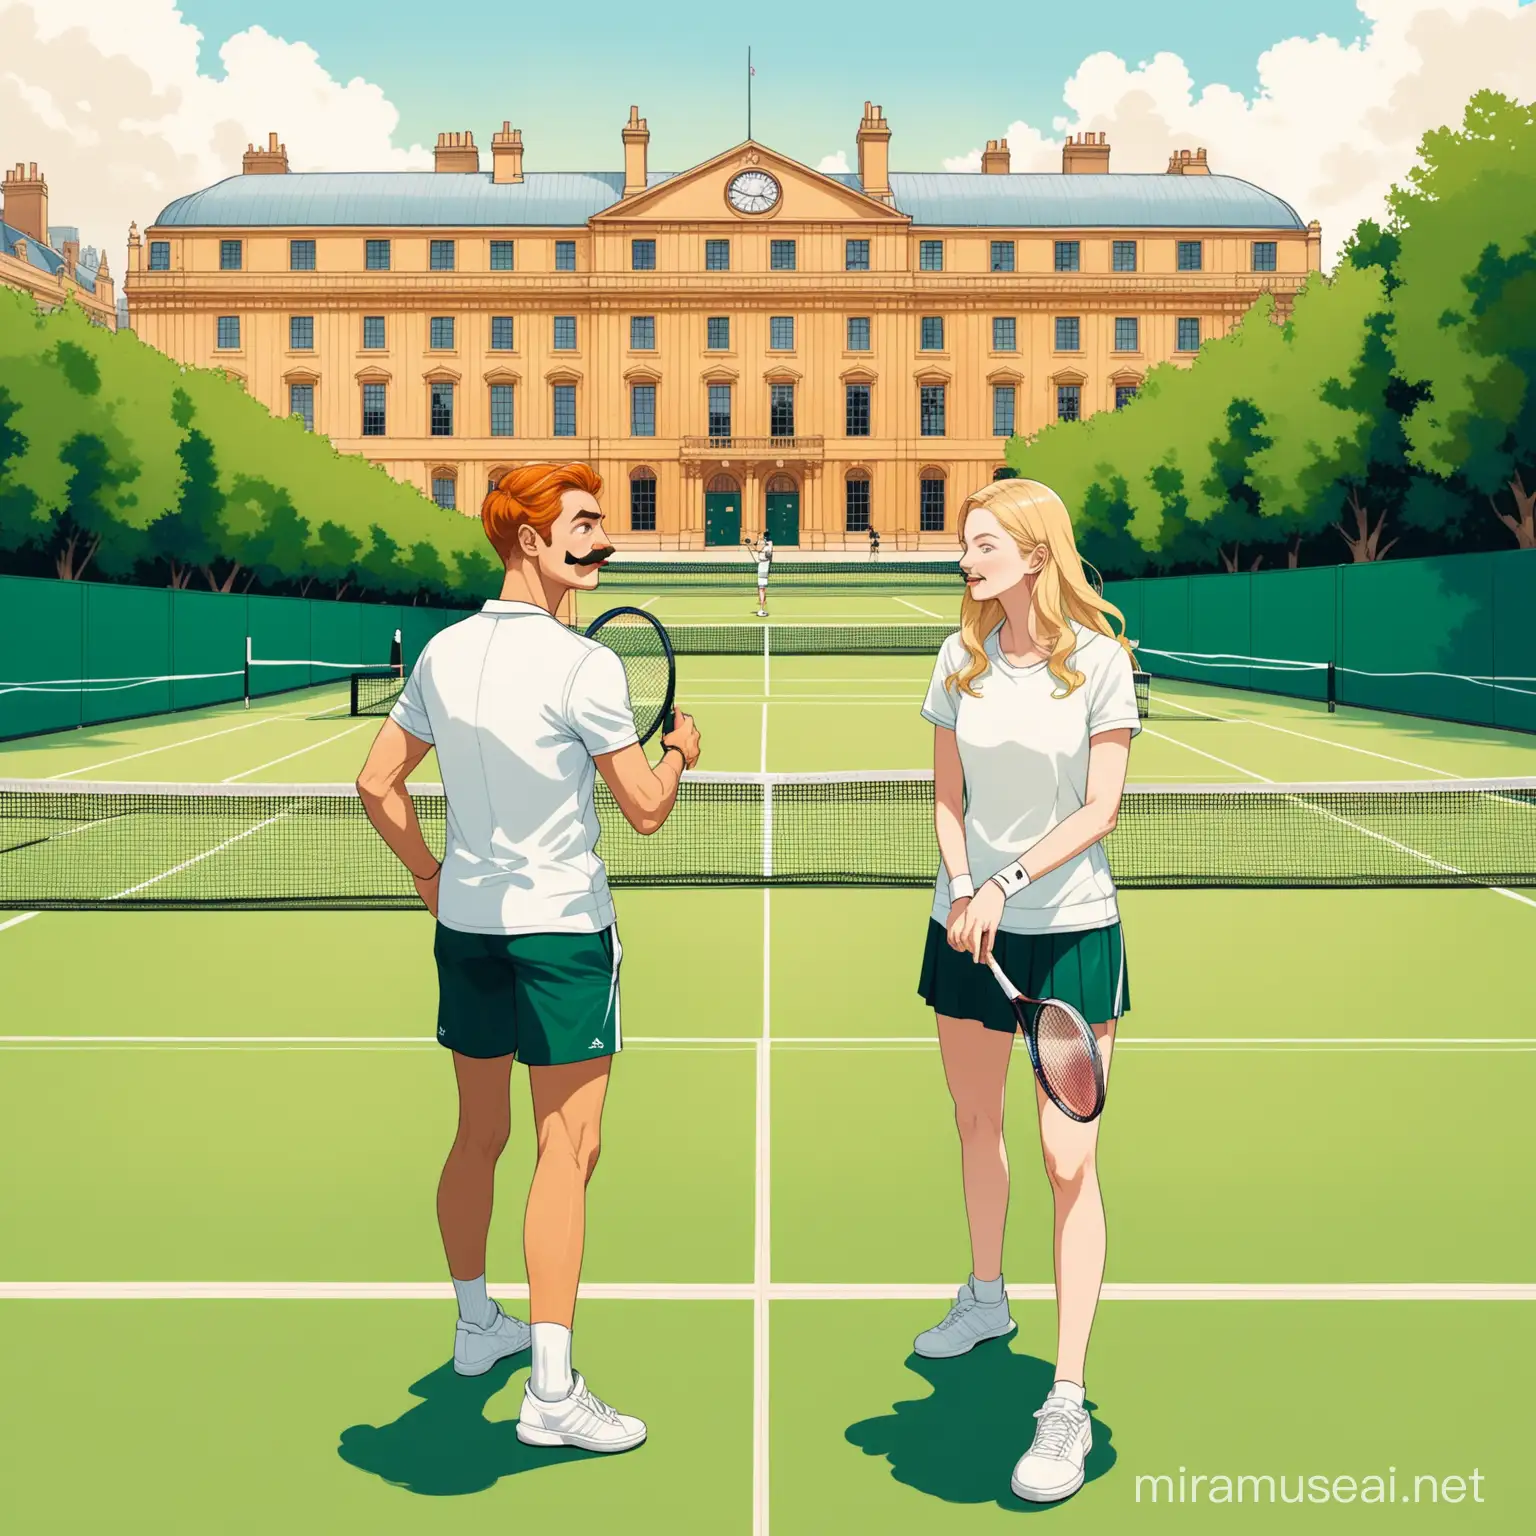 Create image of two young best friends playing tennis one blonde man with a moustache and ginger woman. we are on the grass court with olive trees and in the background is London architecture. make it artsy